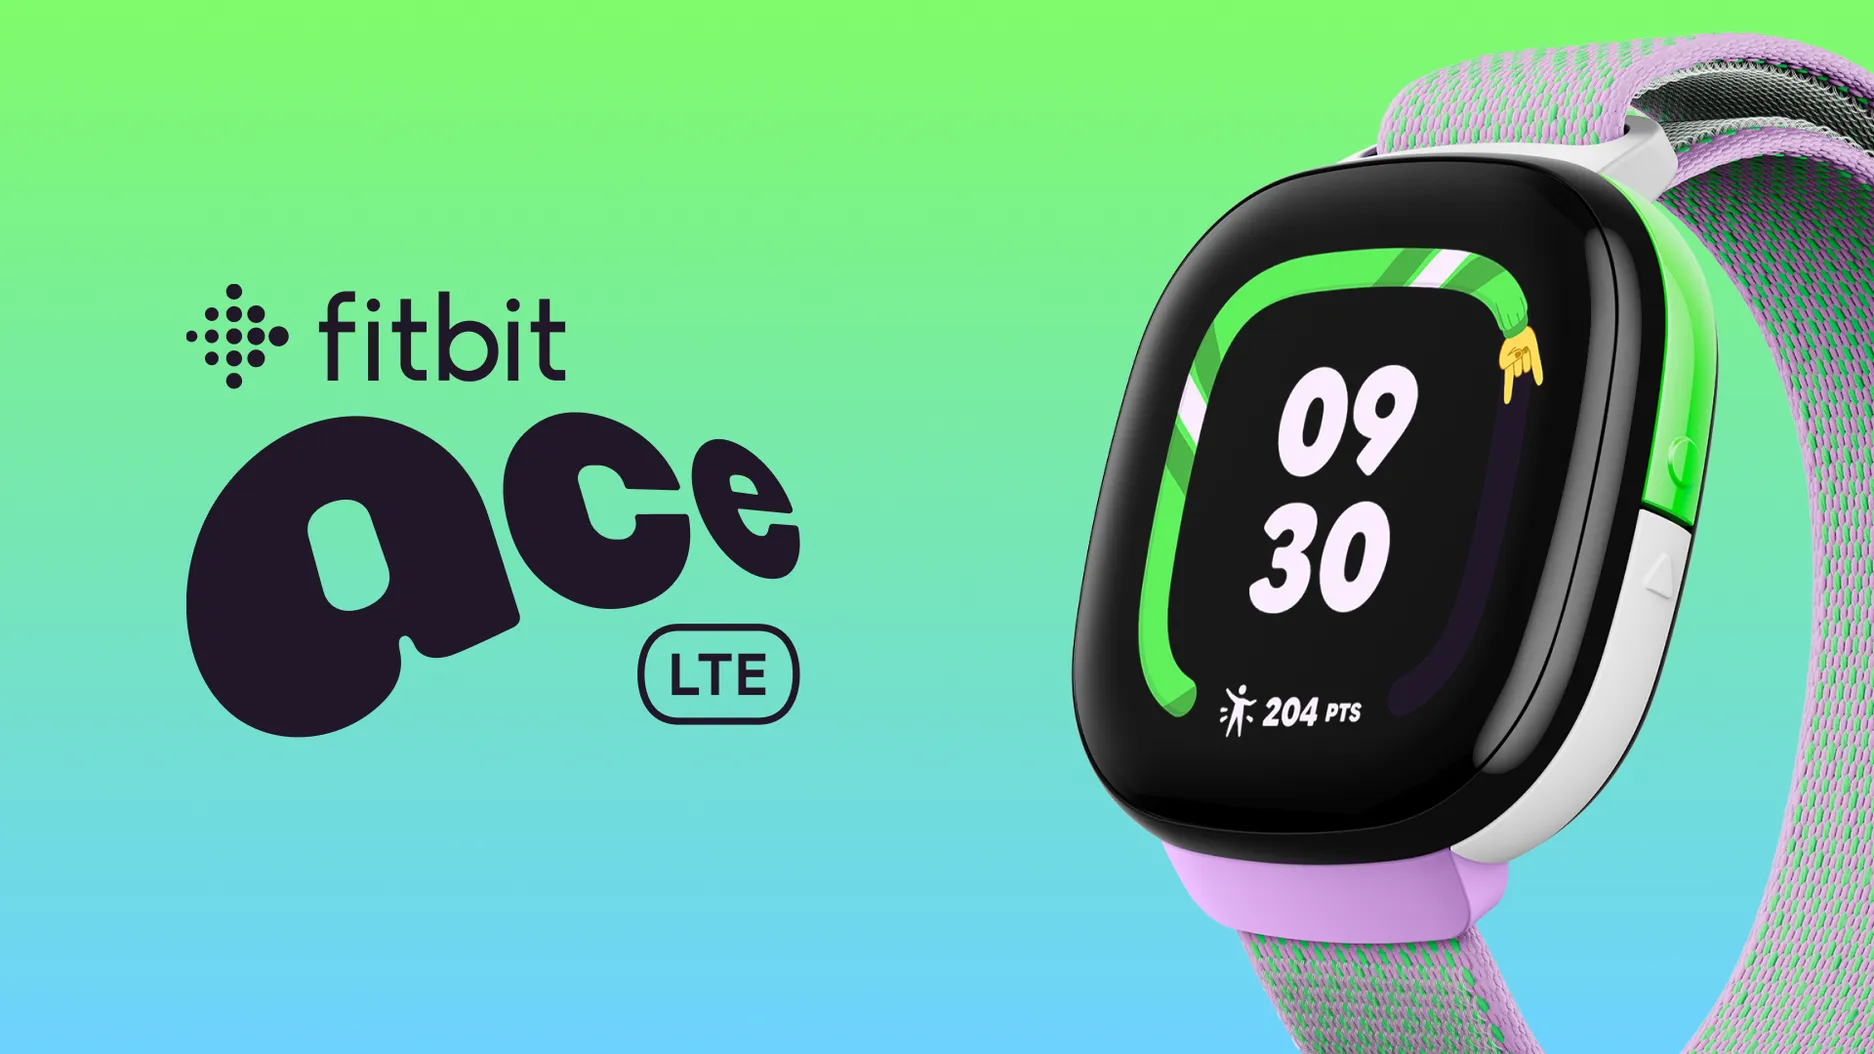 A video showing the Fitbit Ace LTE smartwatch with games on-screen